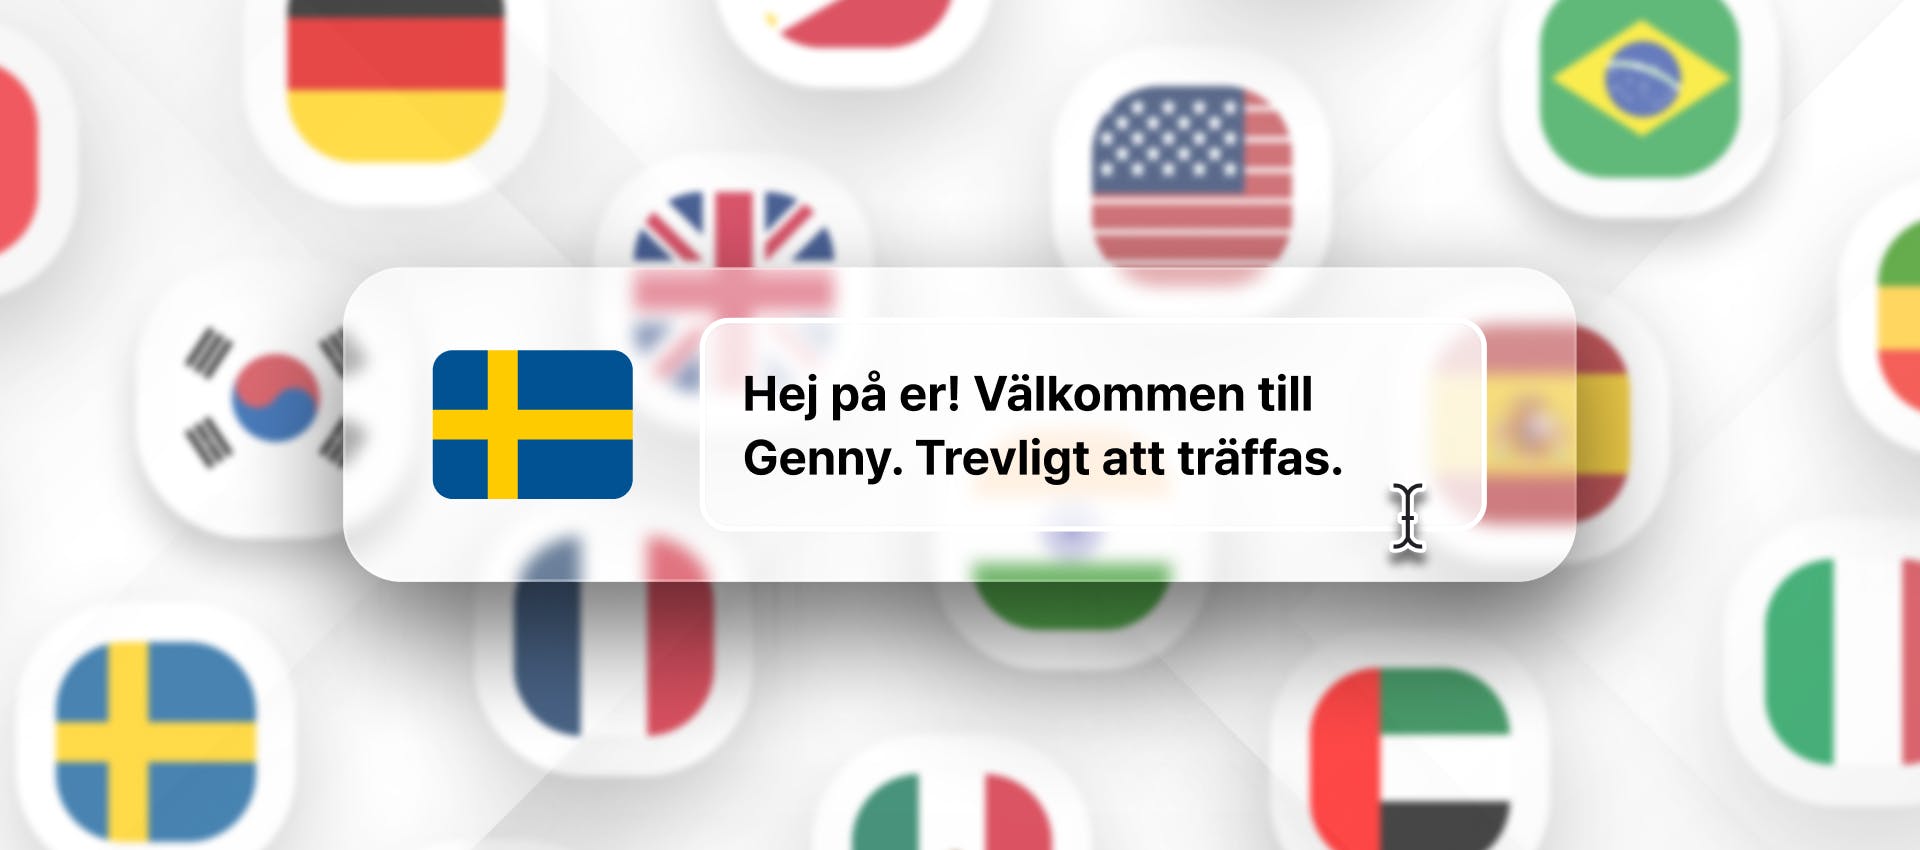 Swedish phrase for Swedish TTS generation with different flags in the background